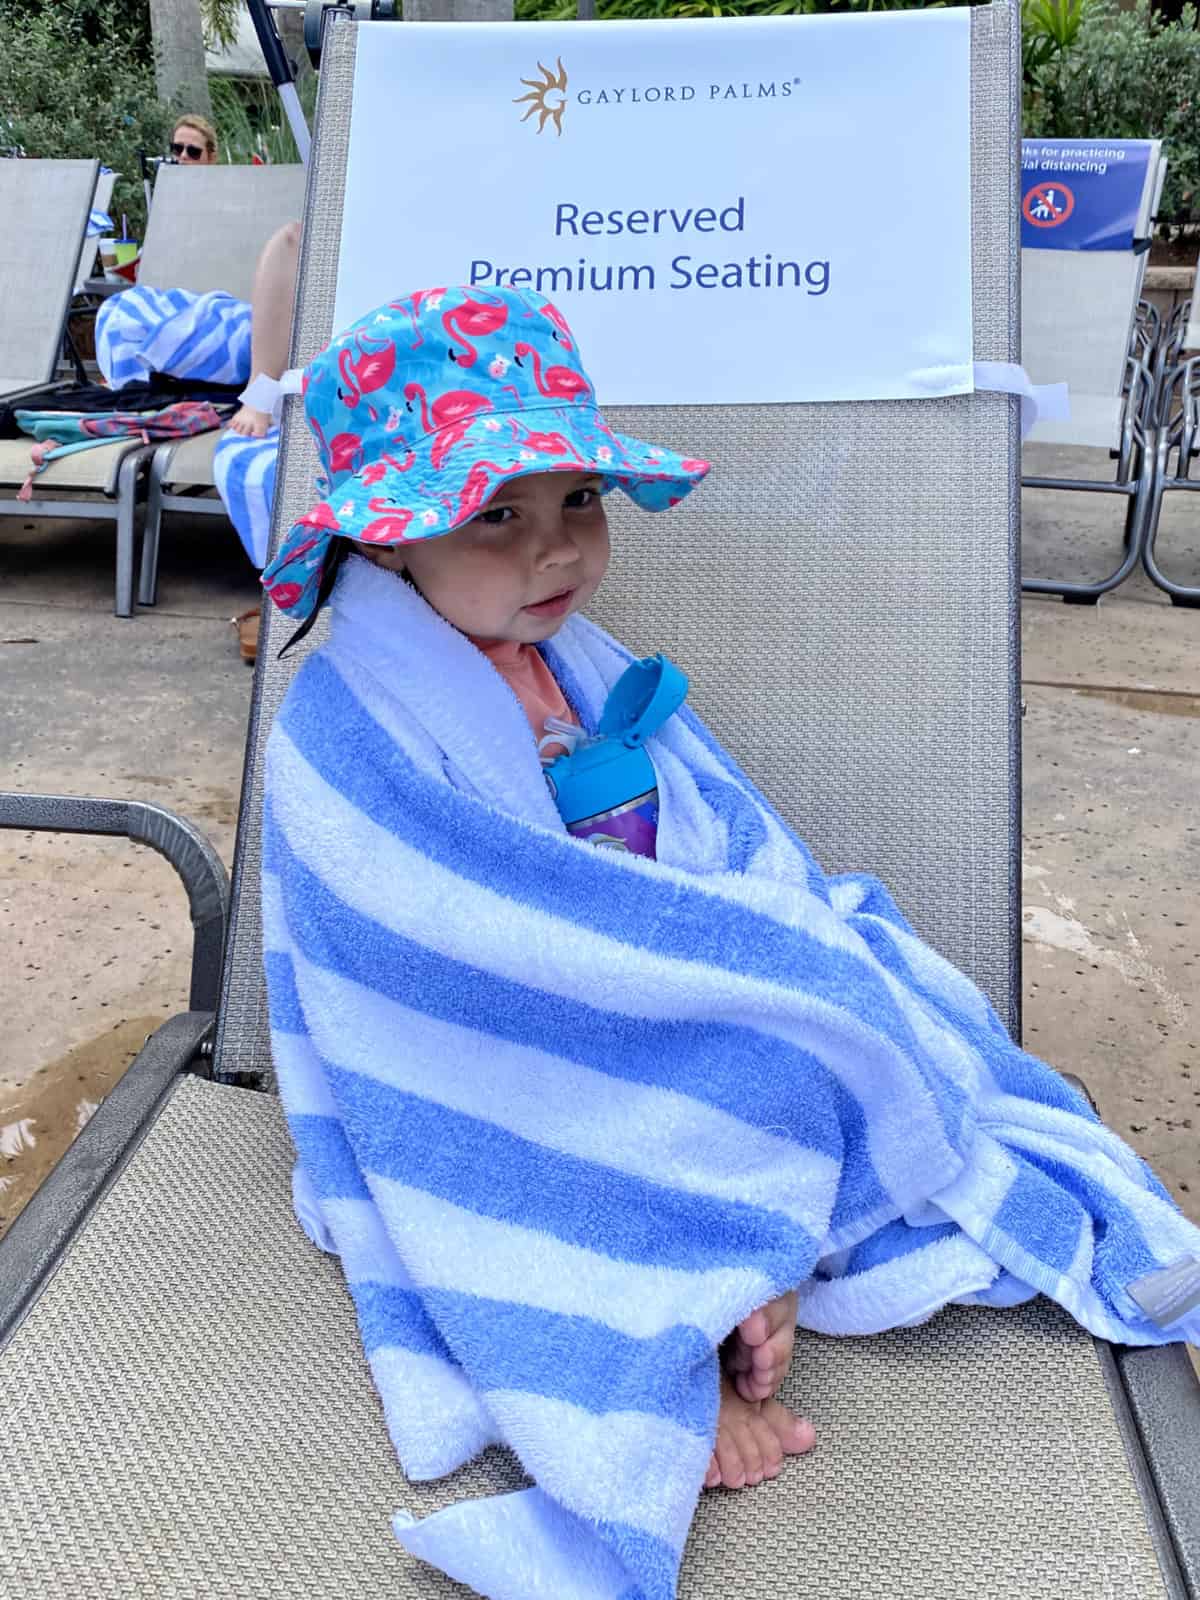 Little girl with flamingo hat wrapped in a white and blue towel sitting on lounge chair.